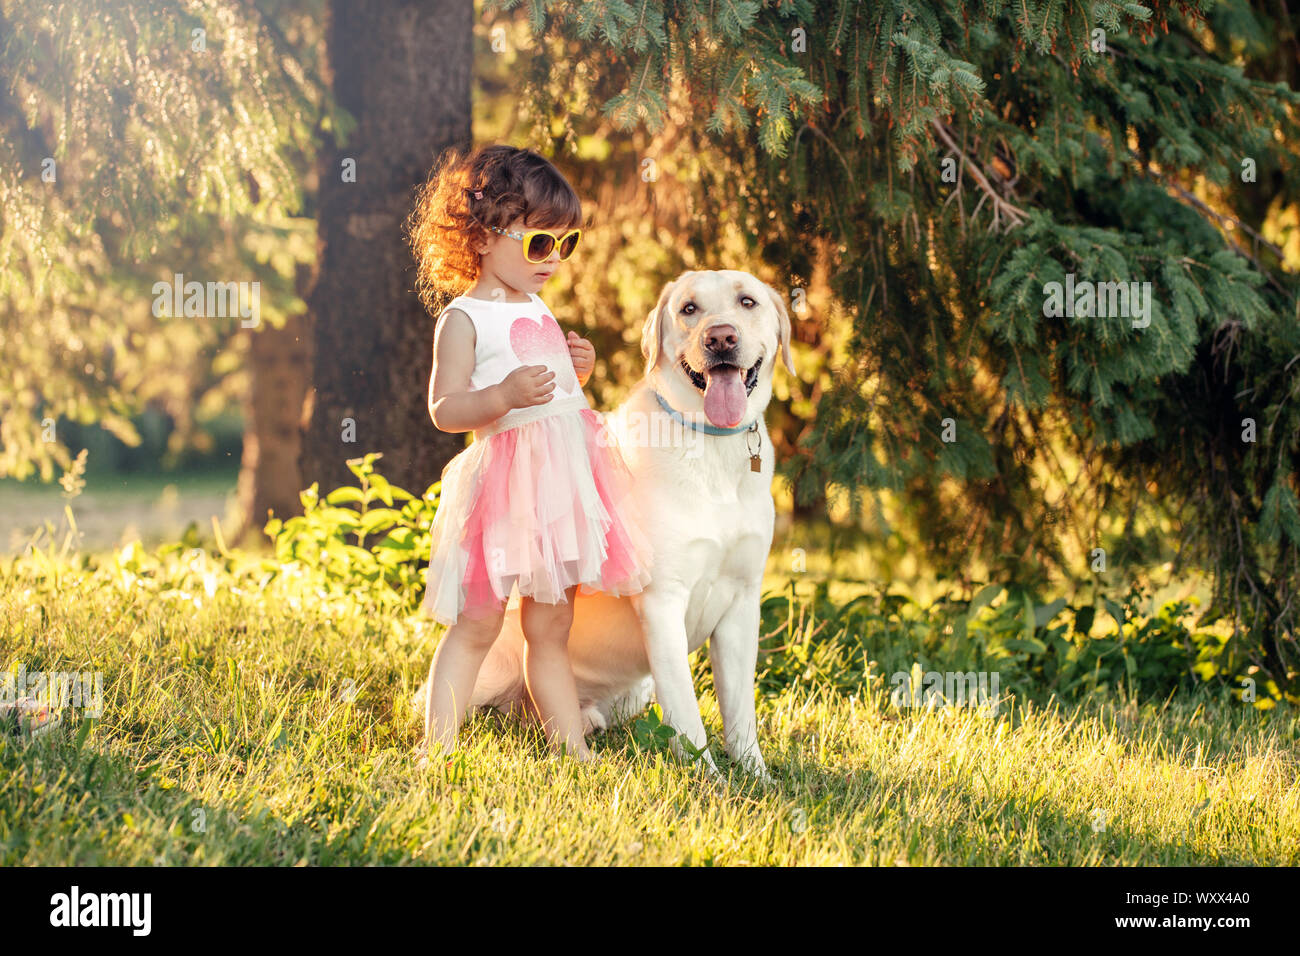 Cute adorable little curly Caucasian girl wearing yellow sunglasses with her dog in park outside at sunset on summer day. Child playing with animal Stock Photo